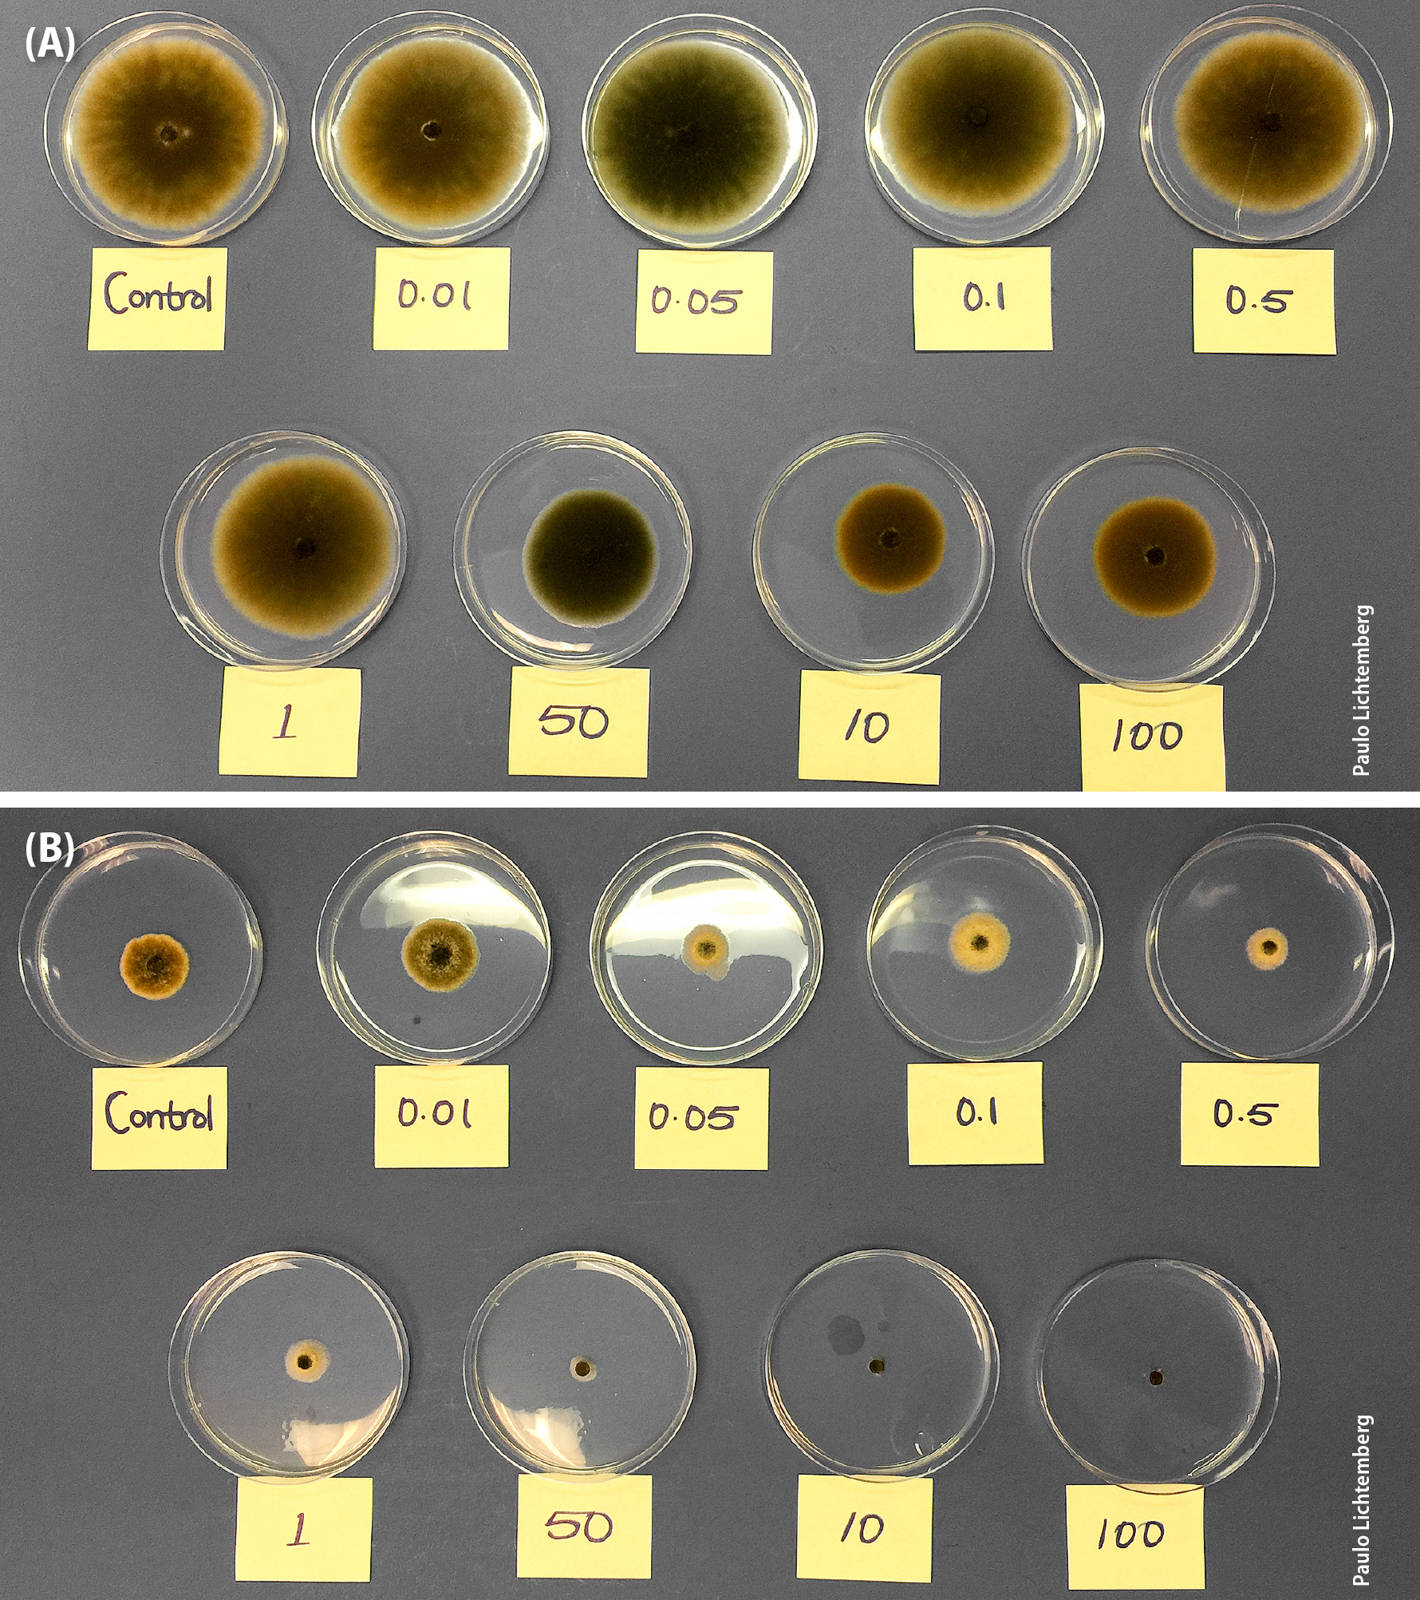 Alternaria alternata fungicide sensitivity assay showing the mycelial inhibition of a resistant (A) and sensitive (B) isolate.